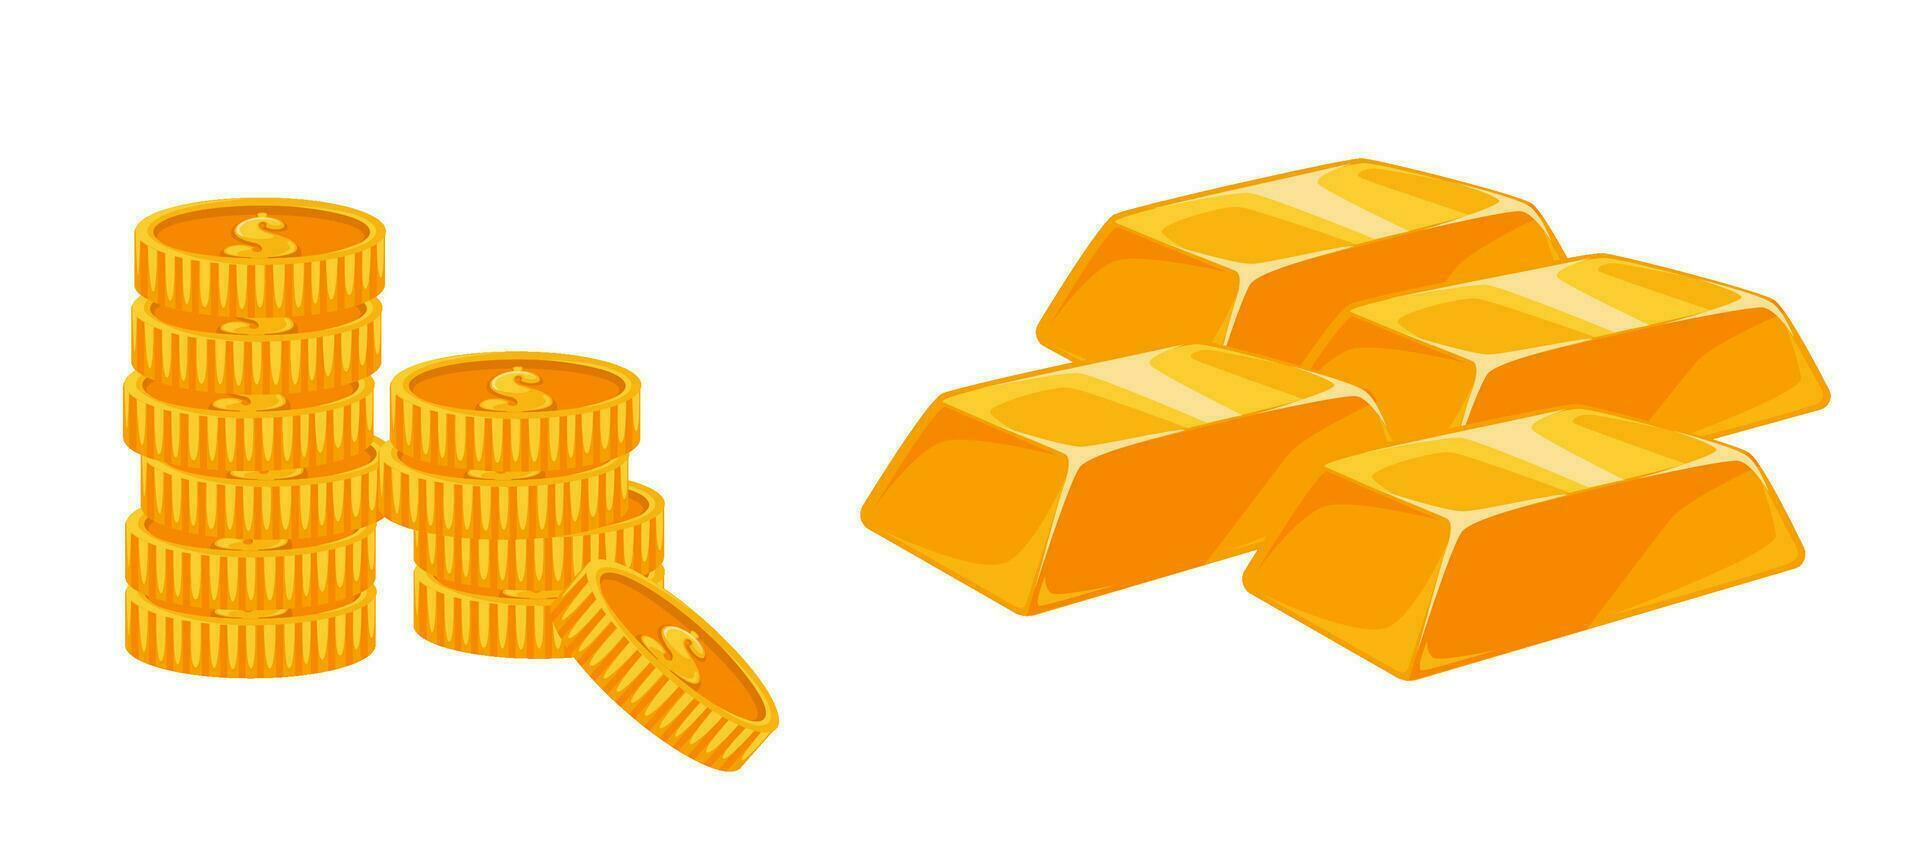 Gold money and wealth, richness financial assets vector